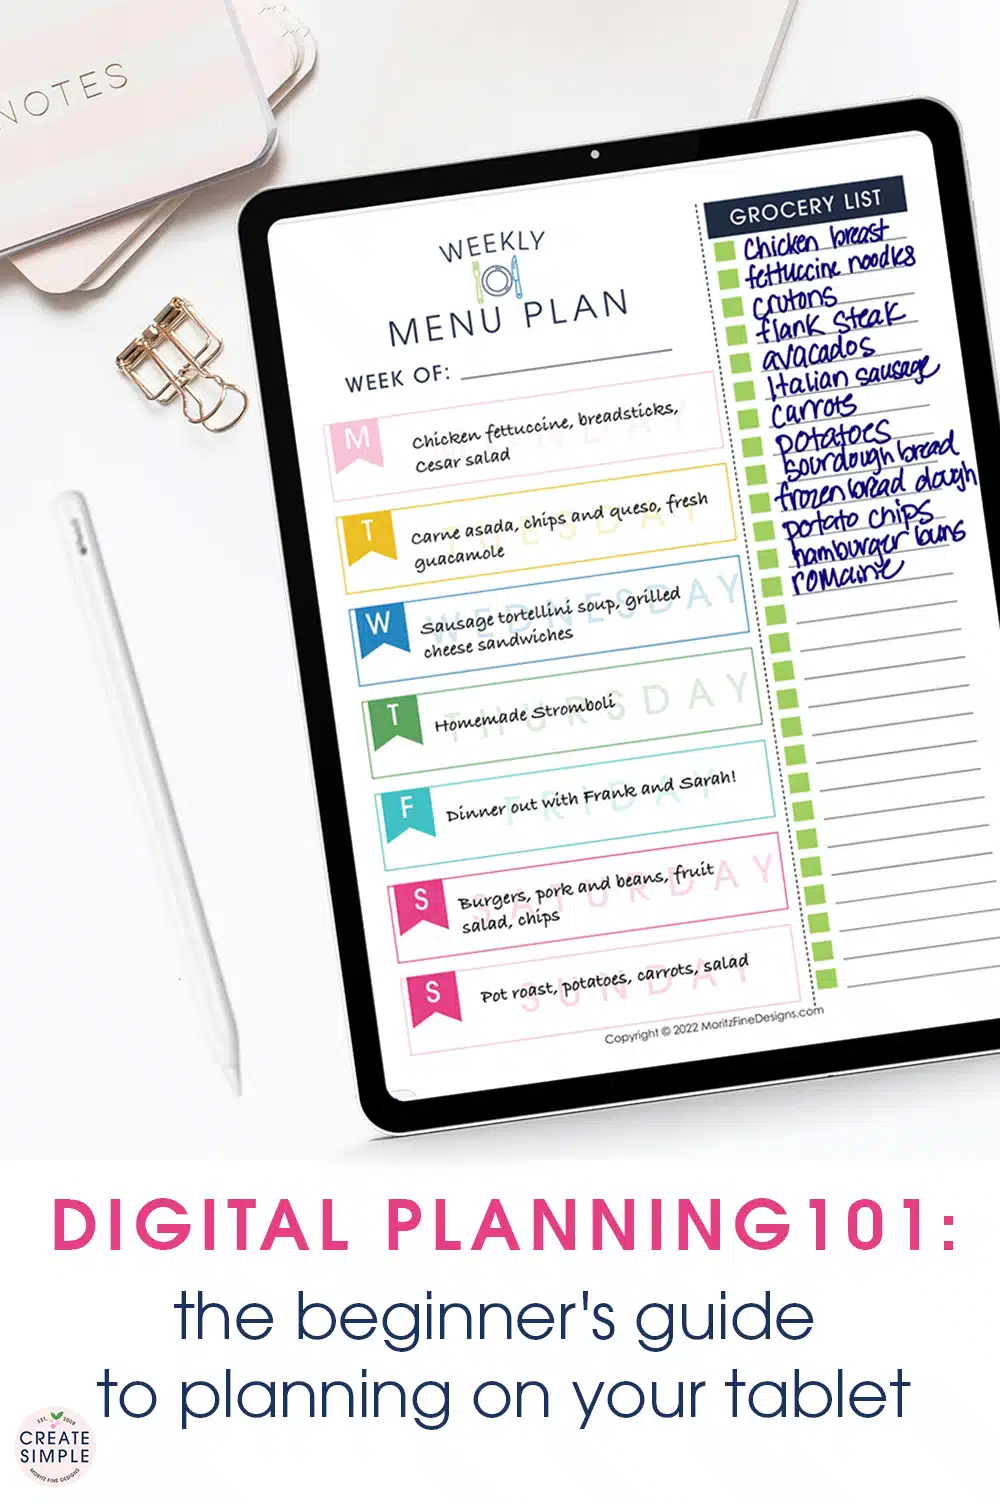 Ready to use your iPad or Android tablet to start digital planning? We teach beginners how to get started today in just a few simple steps!